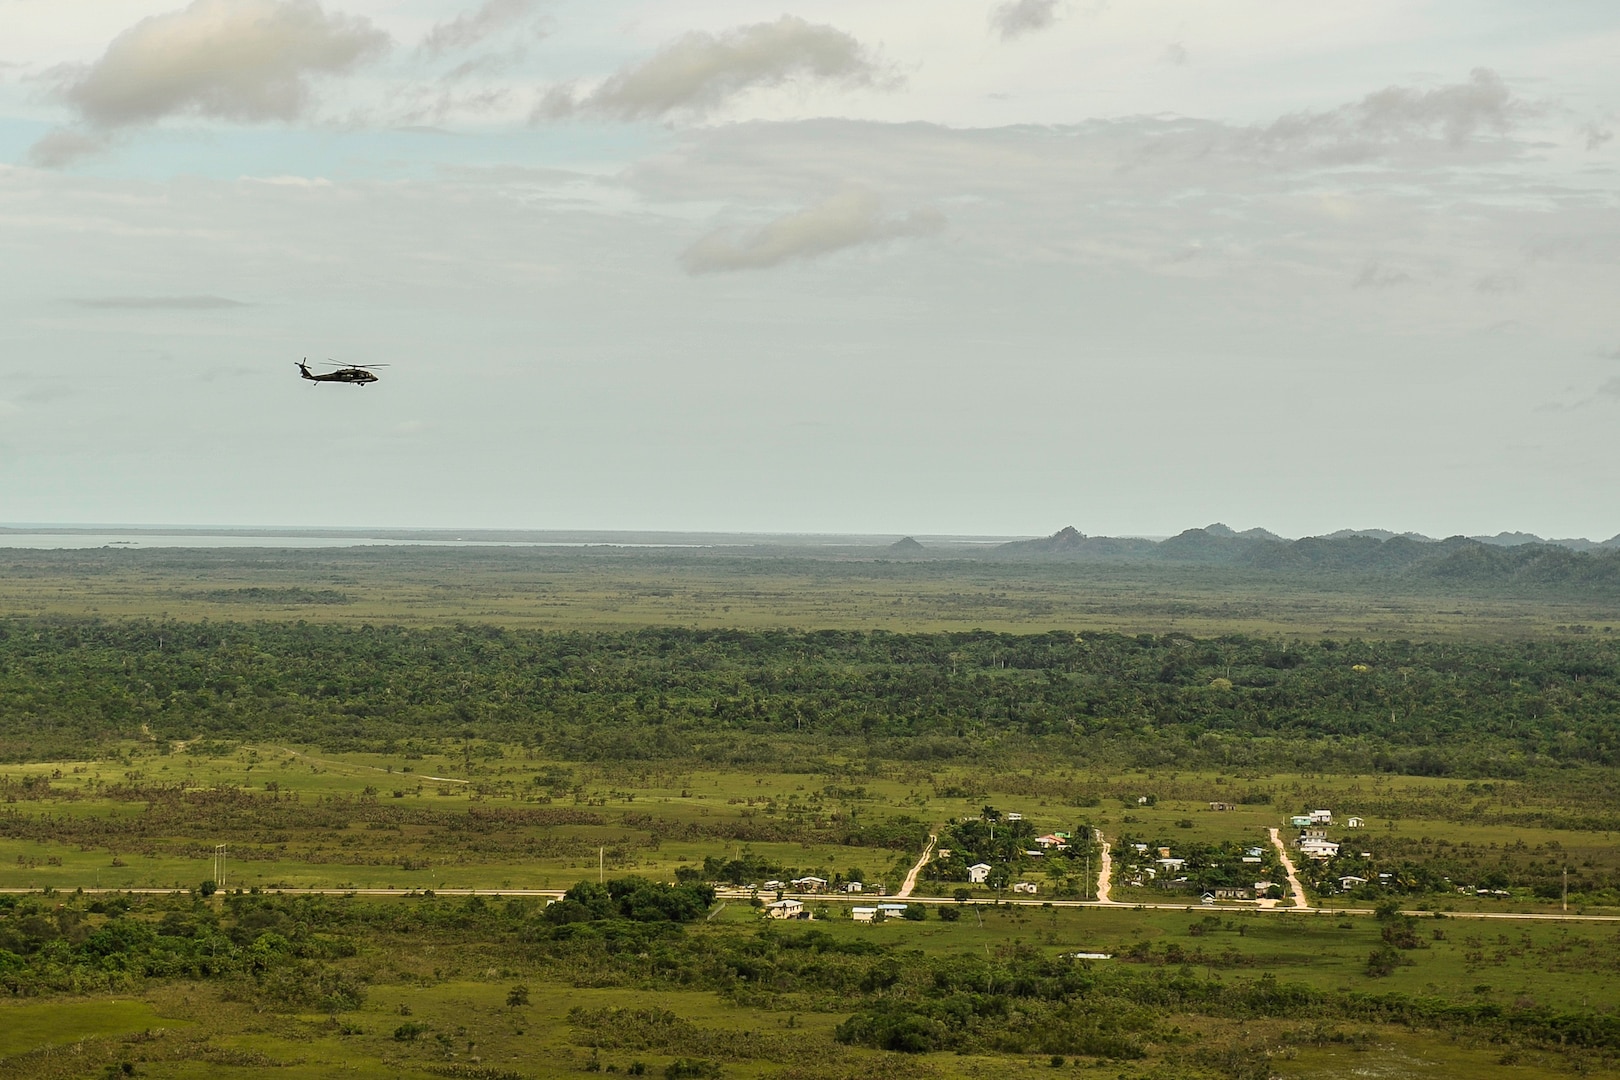 A UH-60 Black Hawk assigned to Joint Task Force-Bravo’s 1st Battalion, 228th Aviation Regiment flies over Belize District during training July 20, 2016. The 1-228th AVN conducts aviation operations in support of partner nation counter-transnational organized crime training throughout the U.S. Southern Command area of responsibility. (U.S. Air Force photo by Staff Sgt. Siuta B. Ika)